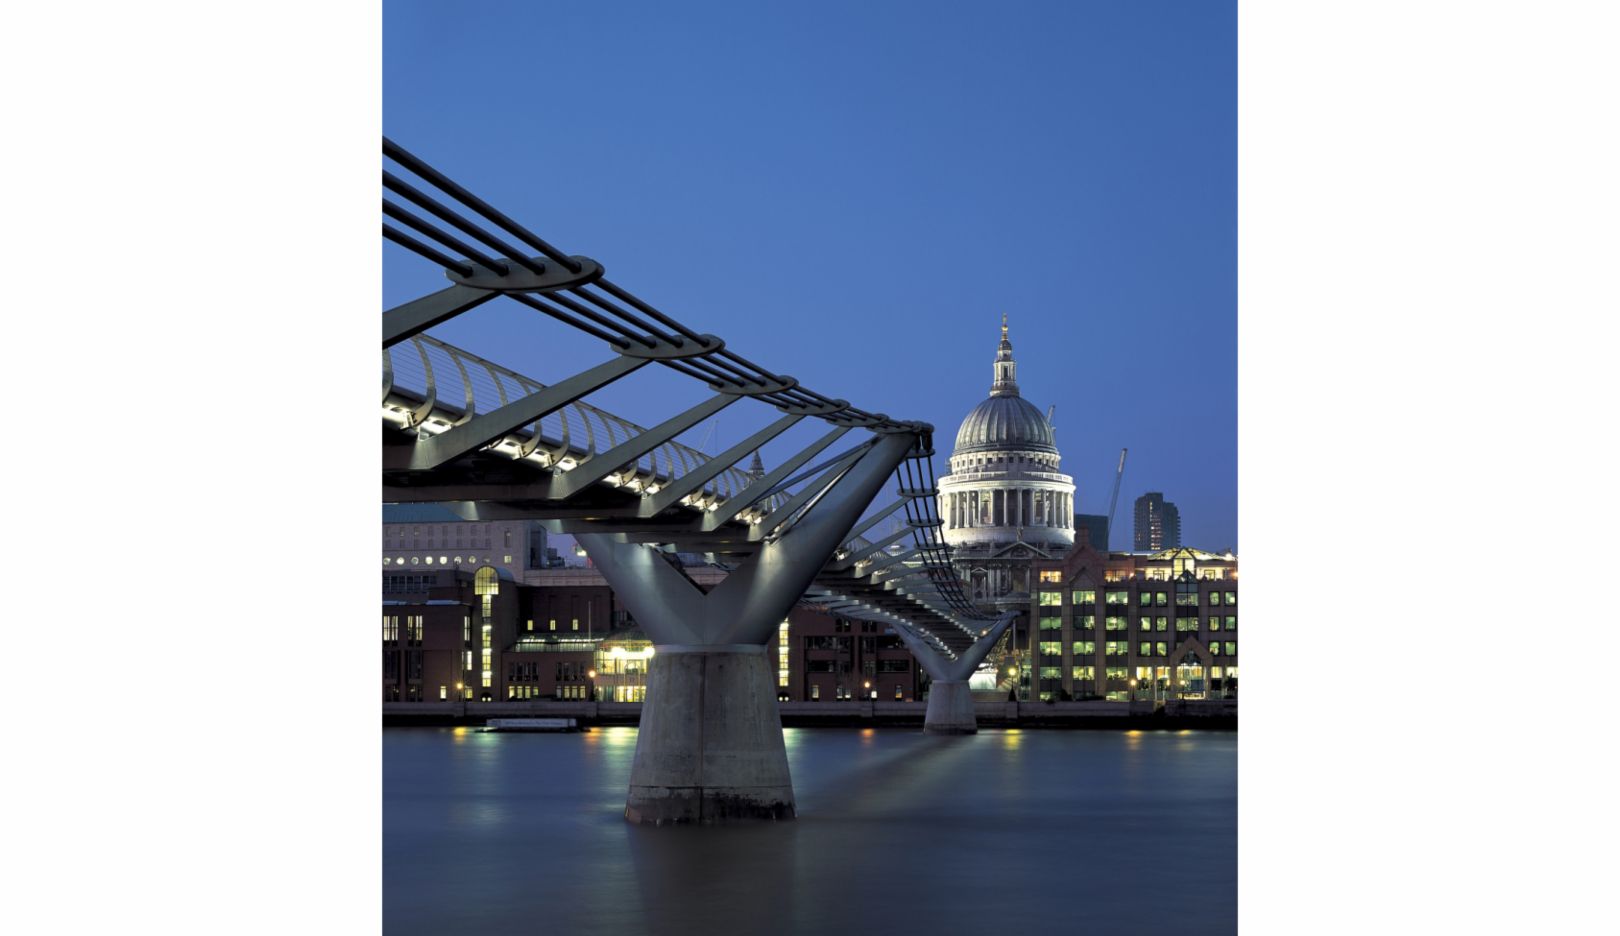 London is also the site of a pedestrian bridge designed by Lord Norman Foster. The famous Millennium Bridge spans the Thames. Around 100,000 people walked across it on the first weekend after it opened in June 2000. Photo: Nigel Young / Foster + Partners